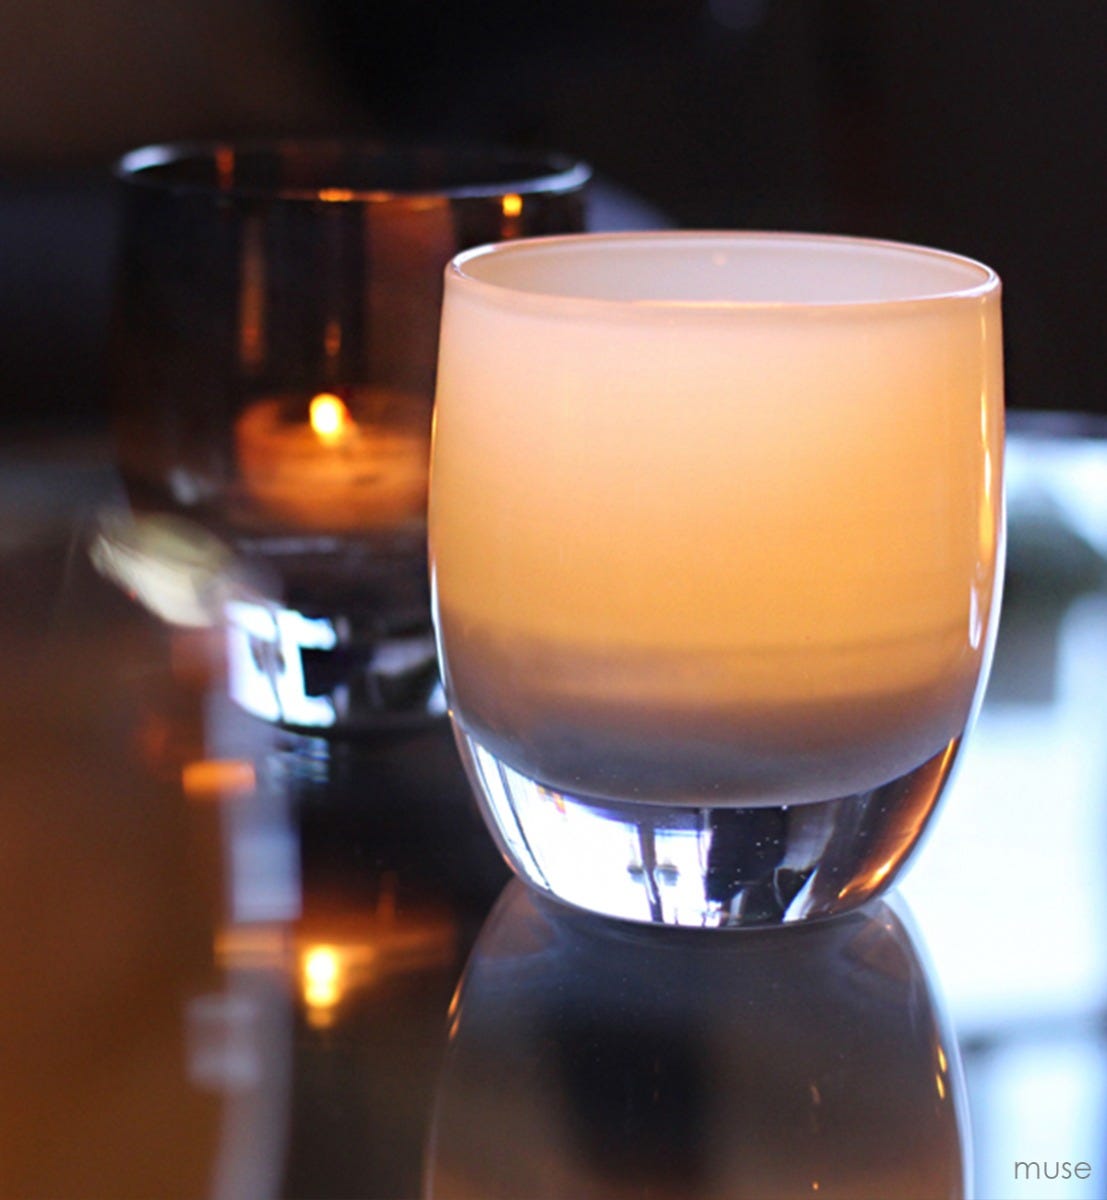 muse gray hand-blown glass votive candle holder.